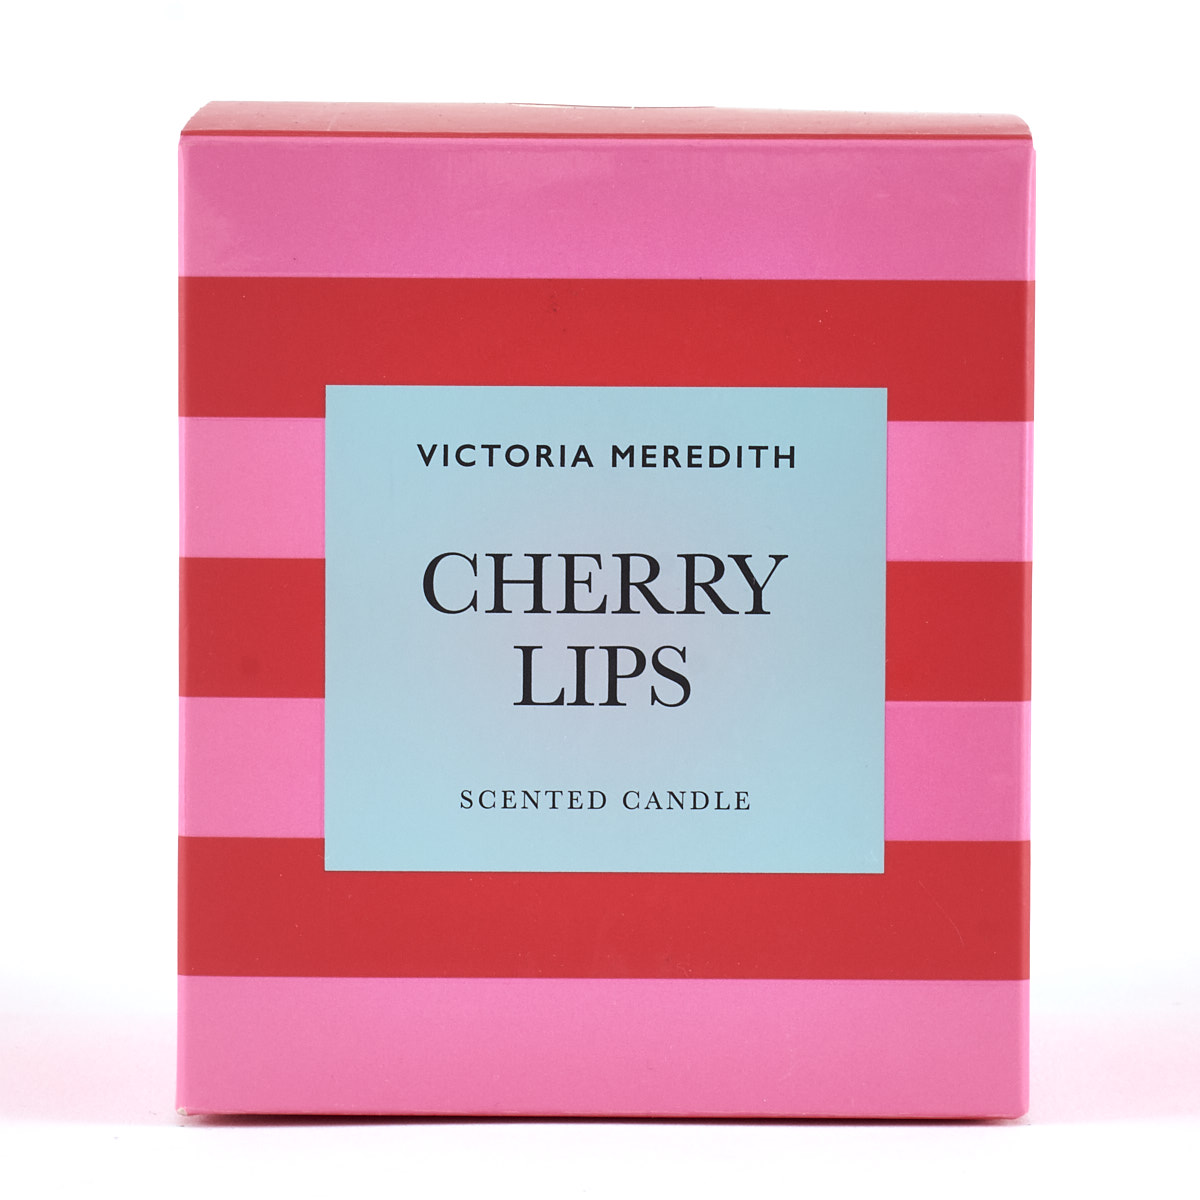 Victoria Meredith Cherry Lips Scented Candle